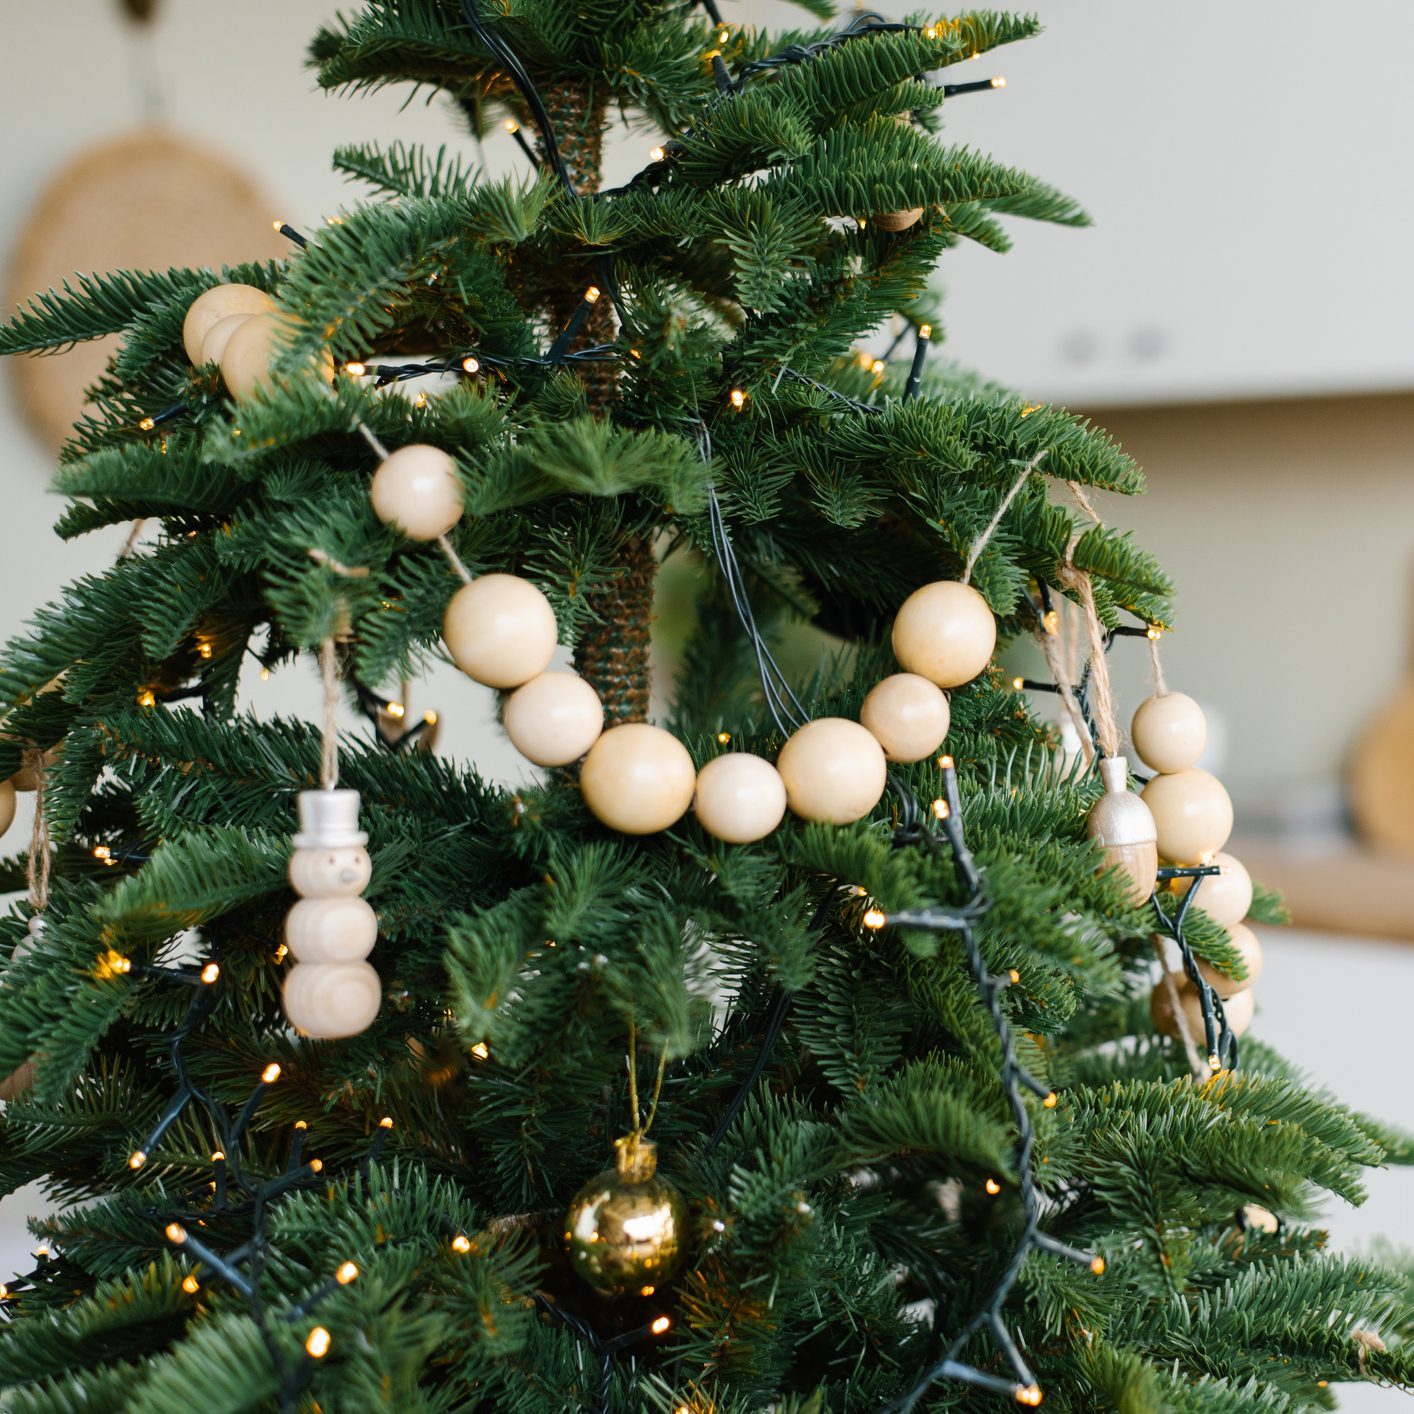 Stylish wooden beads on a Christmas tree in the dining room of a Scandinavian home